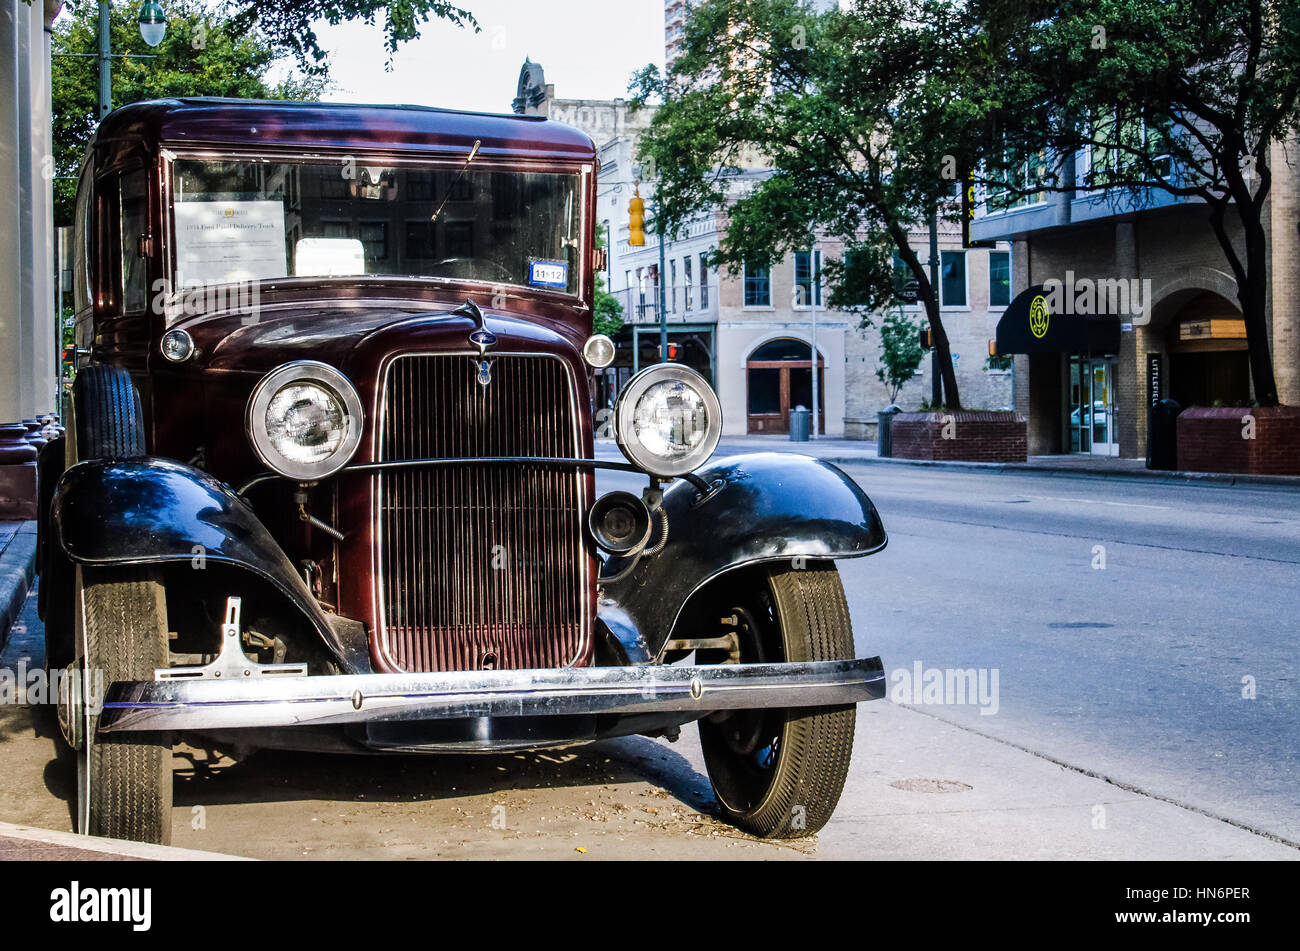 Austin, USA - July 19, 2015: Old 1934 Ford Panel Delivery Truck showcased outside the Driskill hotel in downtown Stock Photo